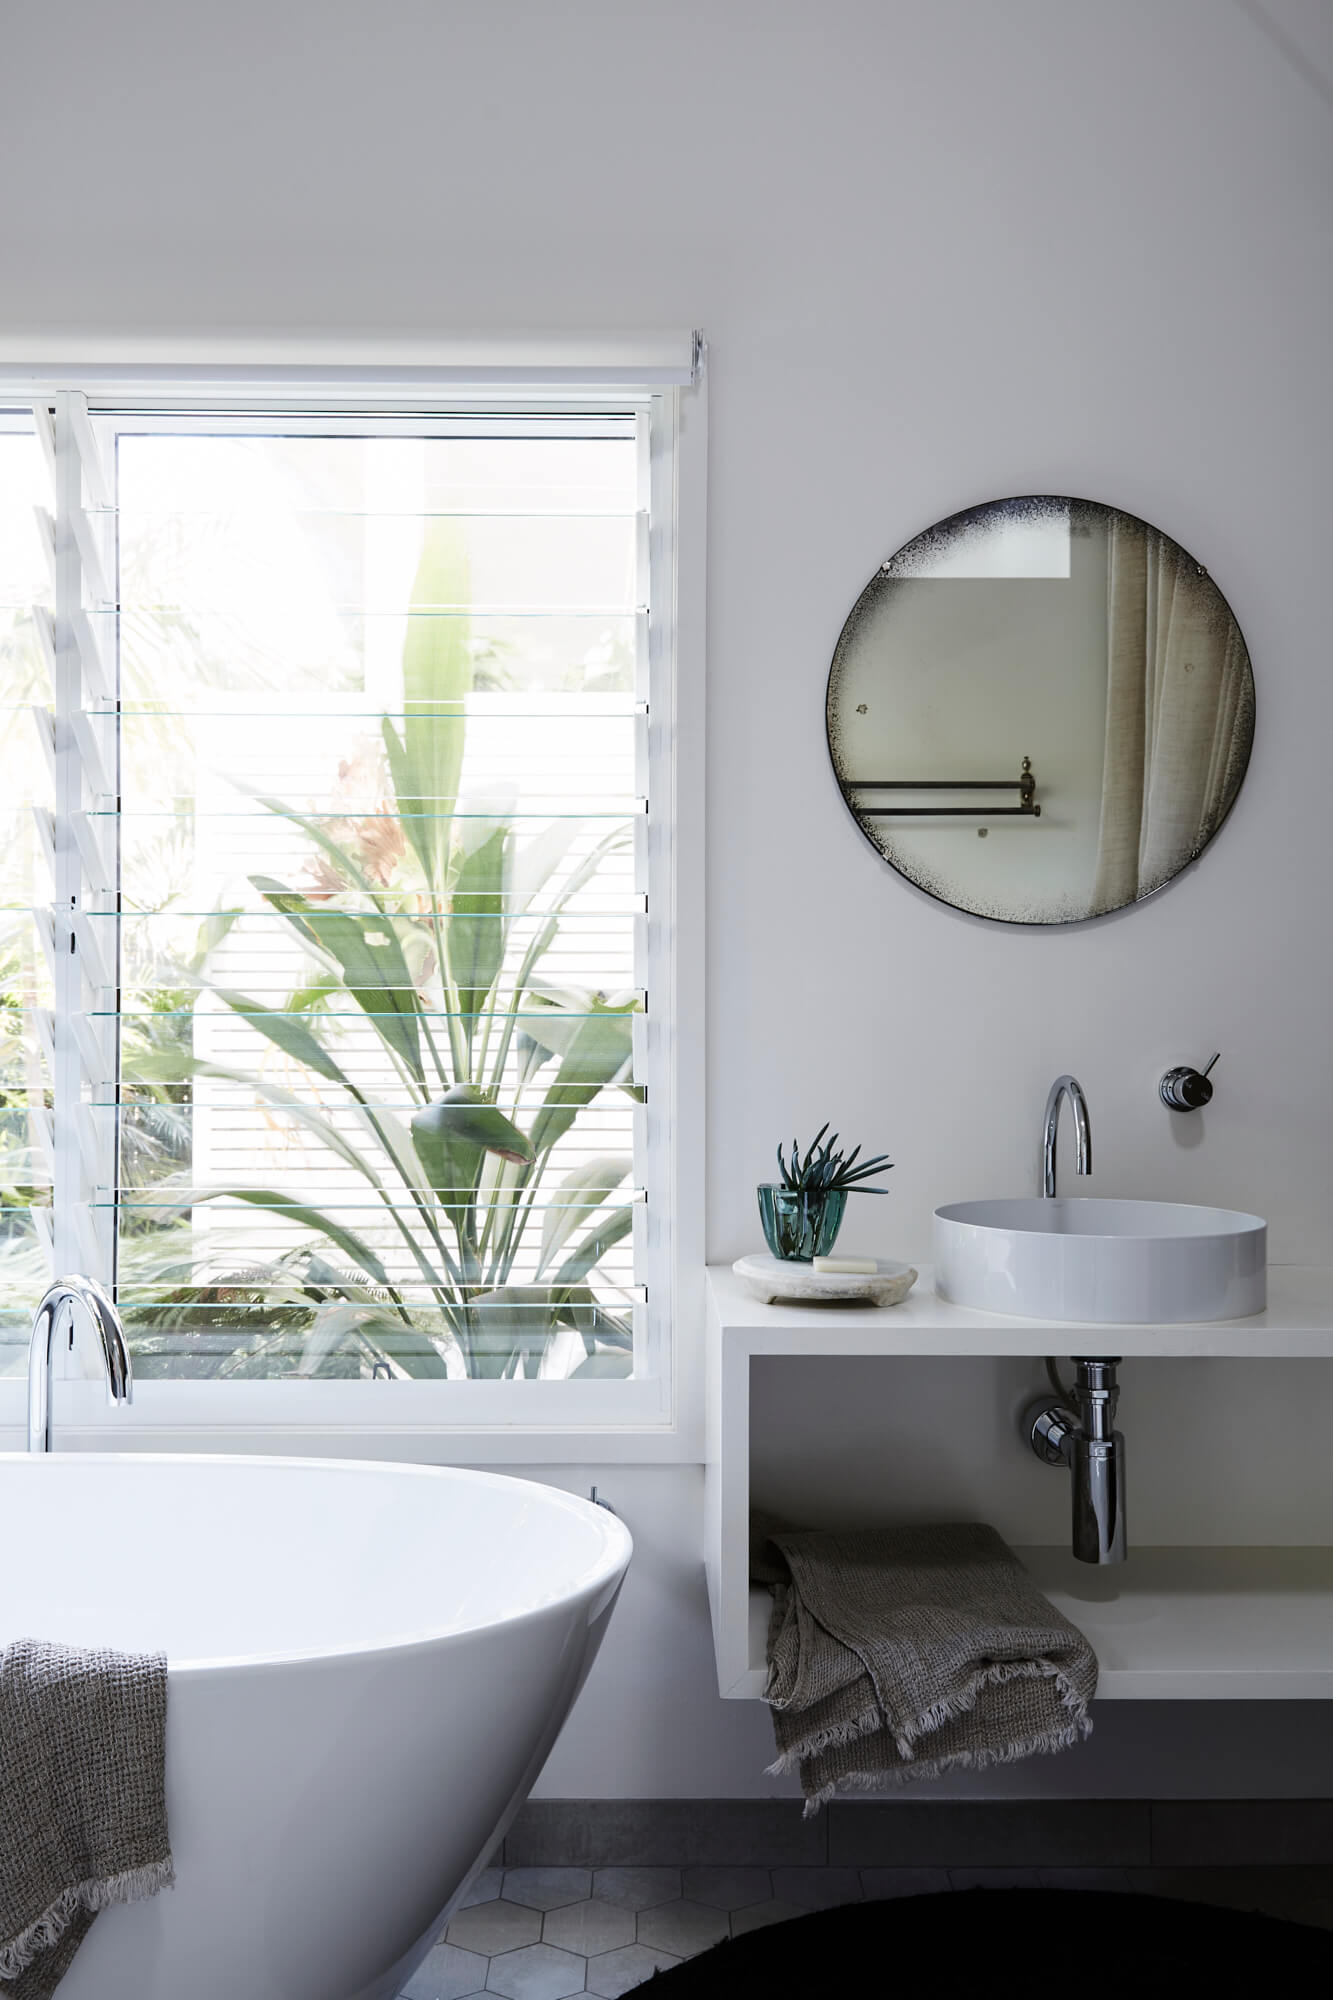 Master ensuite at The Chalet, Byron Beach Abodes with bathtub, antique glass mirror and banks of louvre windows looking out to the tropical garden